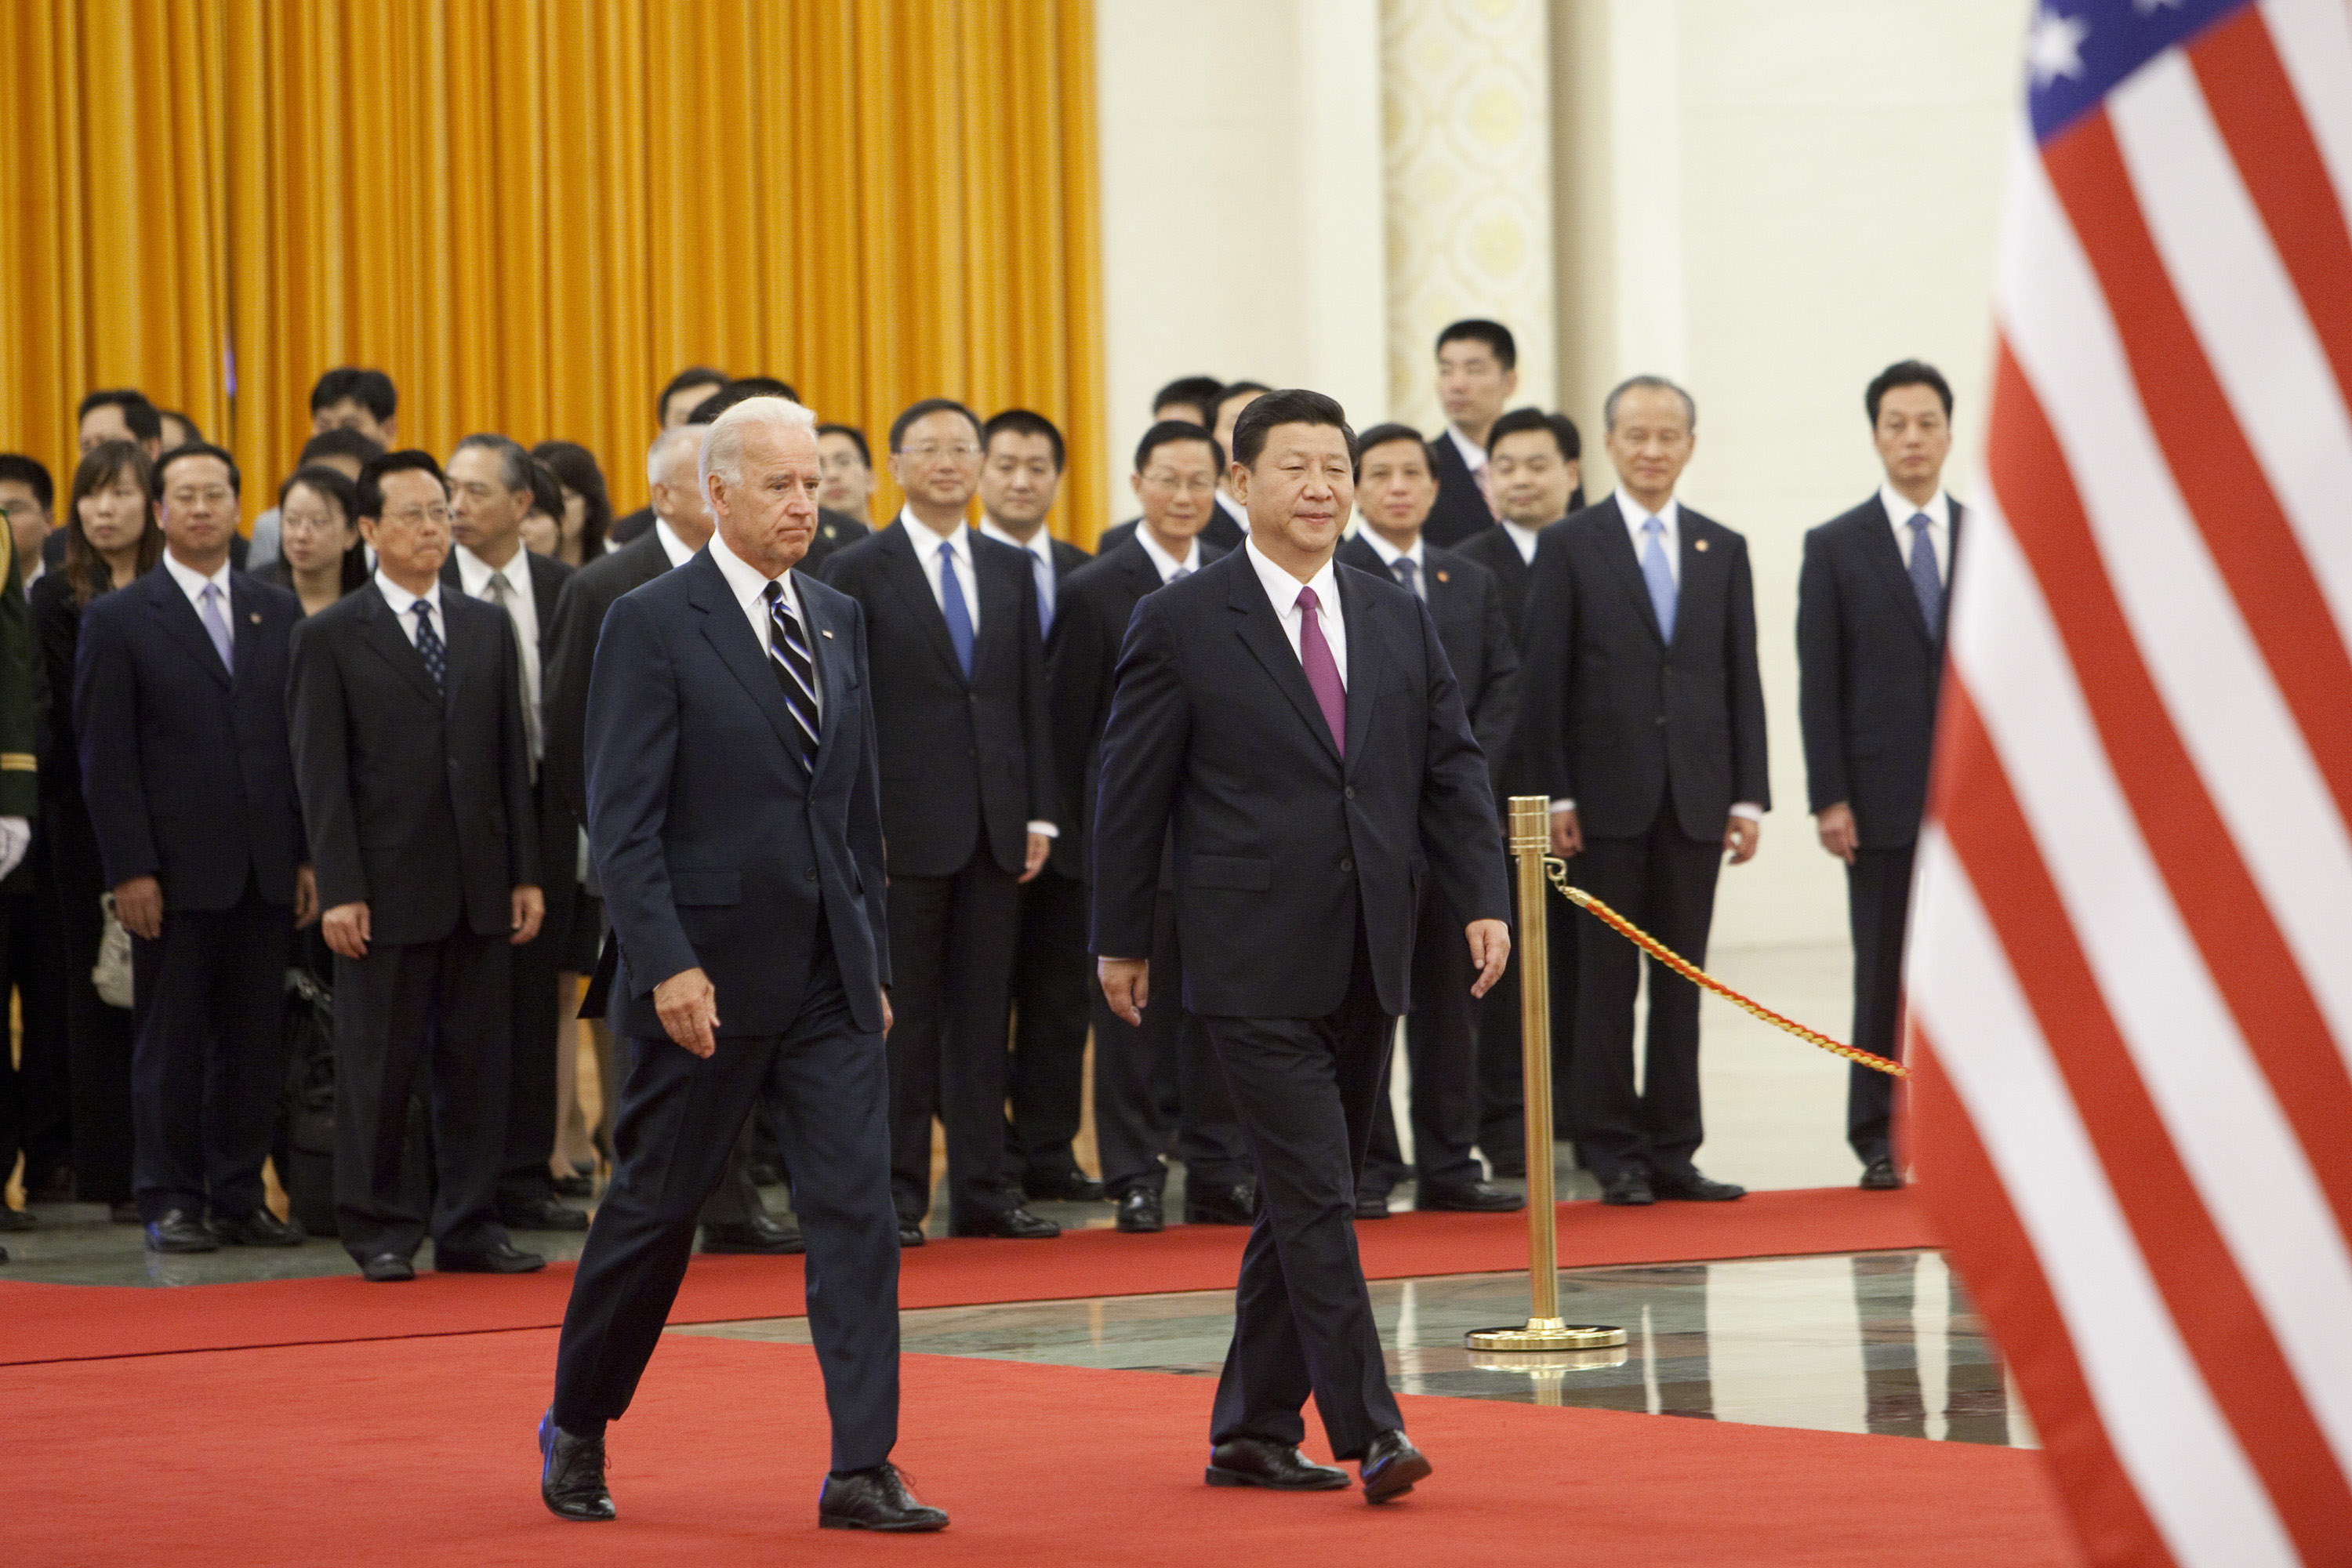 Joe Biden with Xi Jinping at the Great Hall of the People in Beijing, China, on August 18, 2011. 